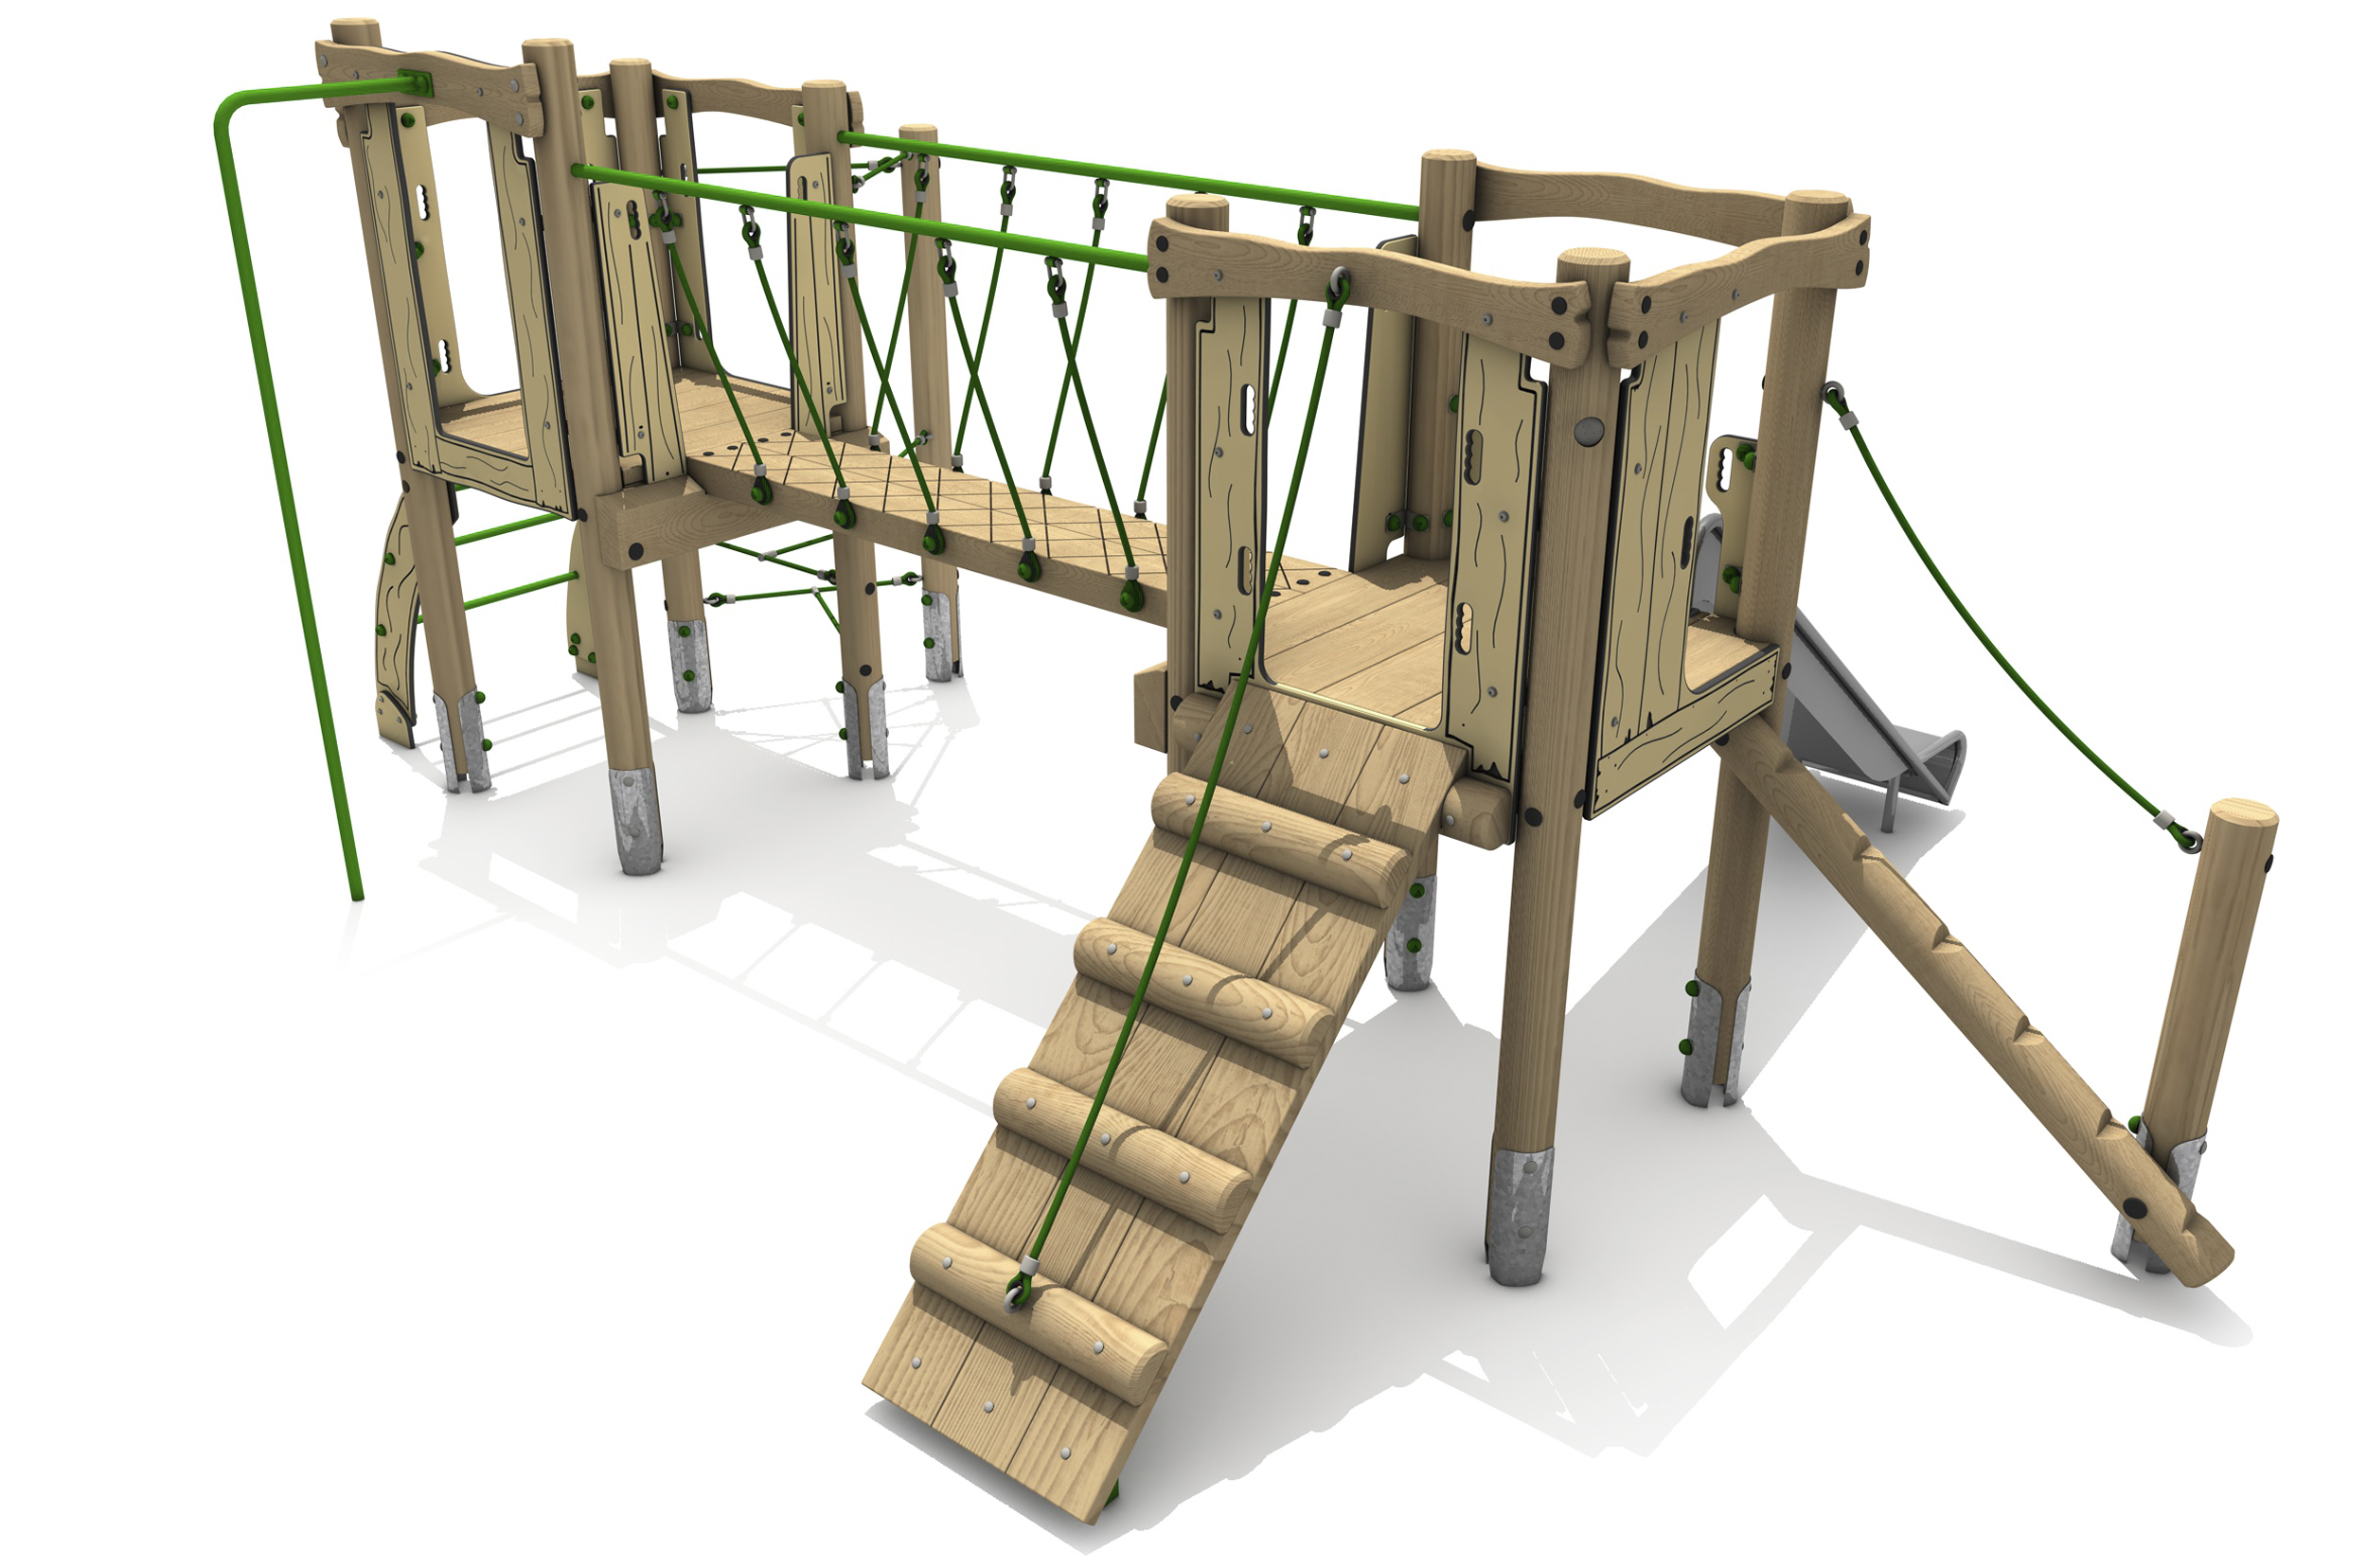 Timber Tower Double Deck 02, A timber tower climber, a central bridge links the two platforms, There is green fire pole on the left side, a sloping ramp with green pull up rope, on the right there is a sloping log clim with a green rope.